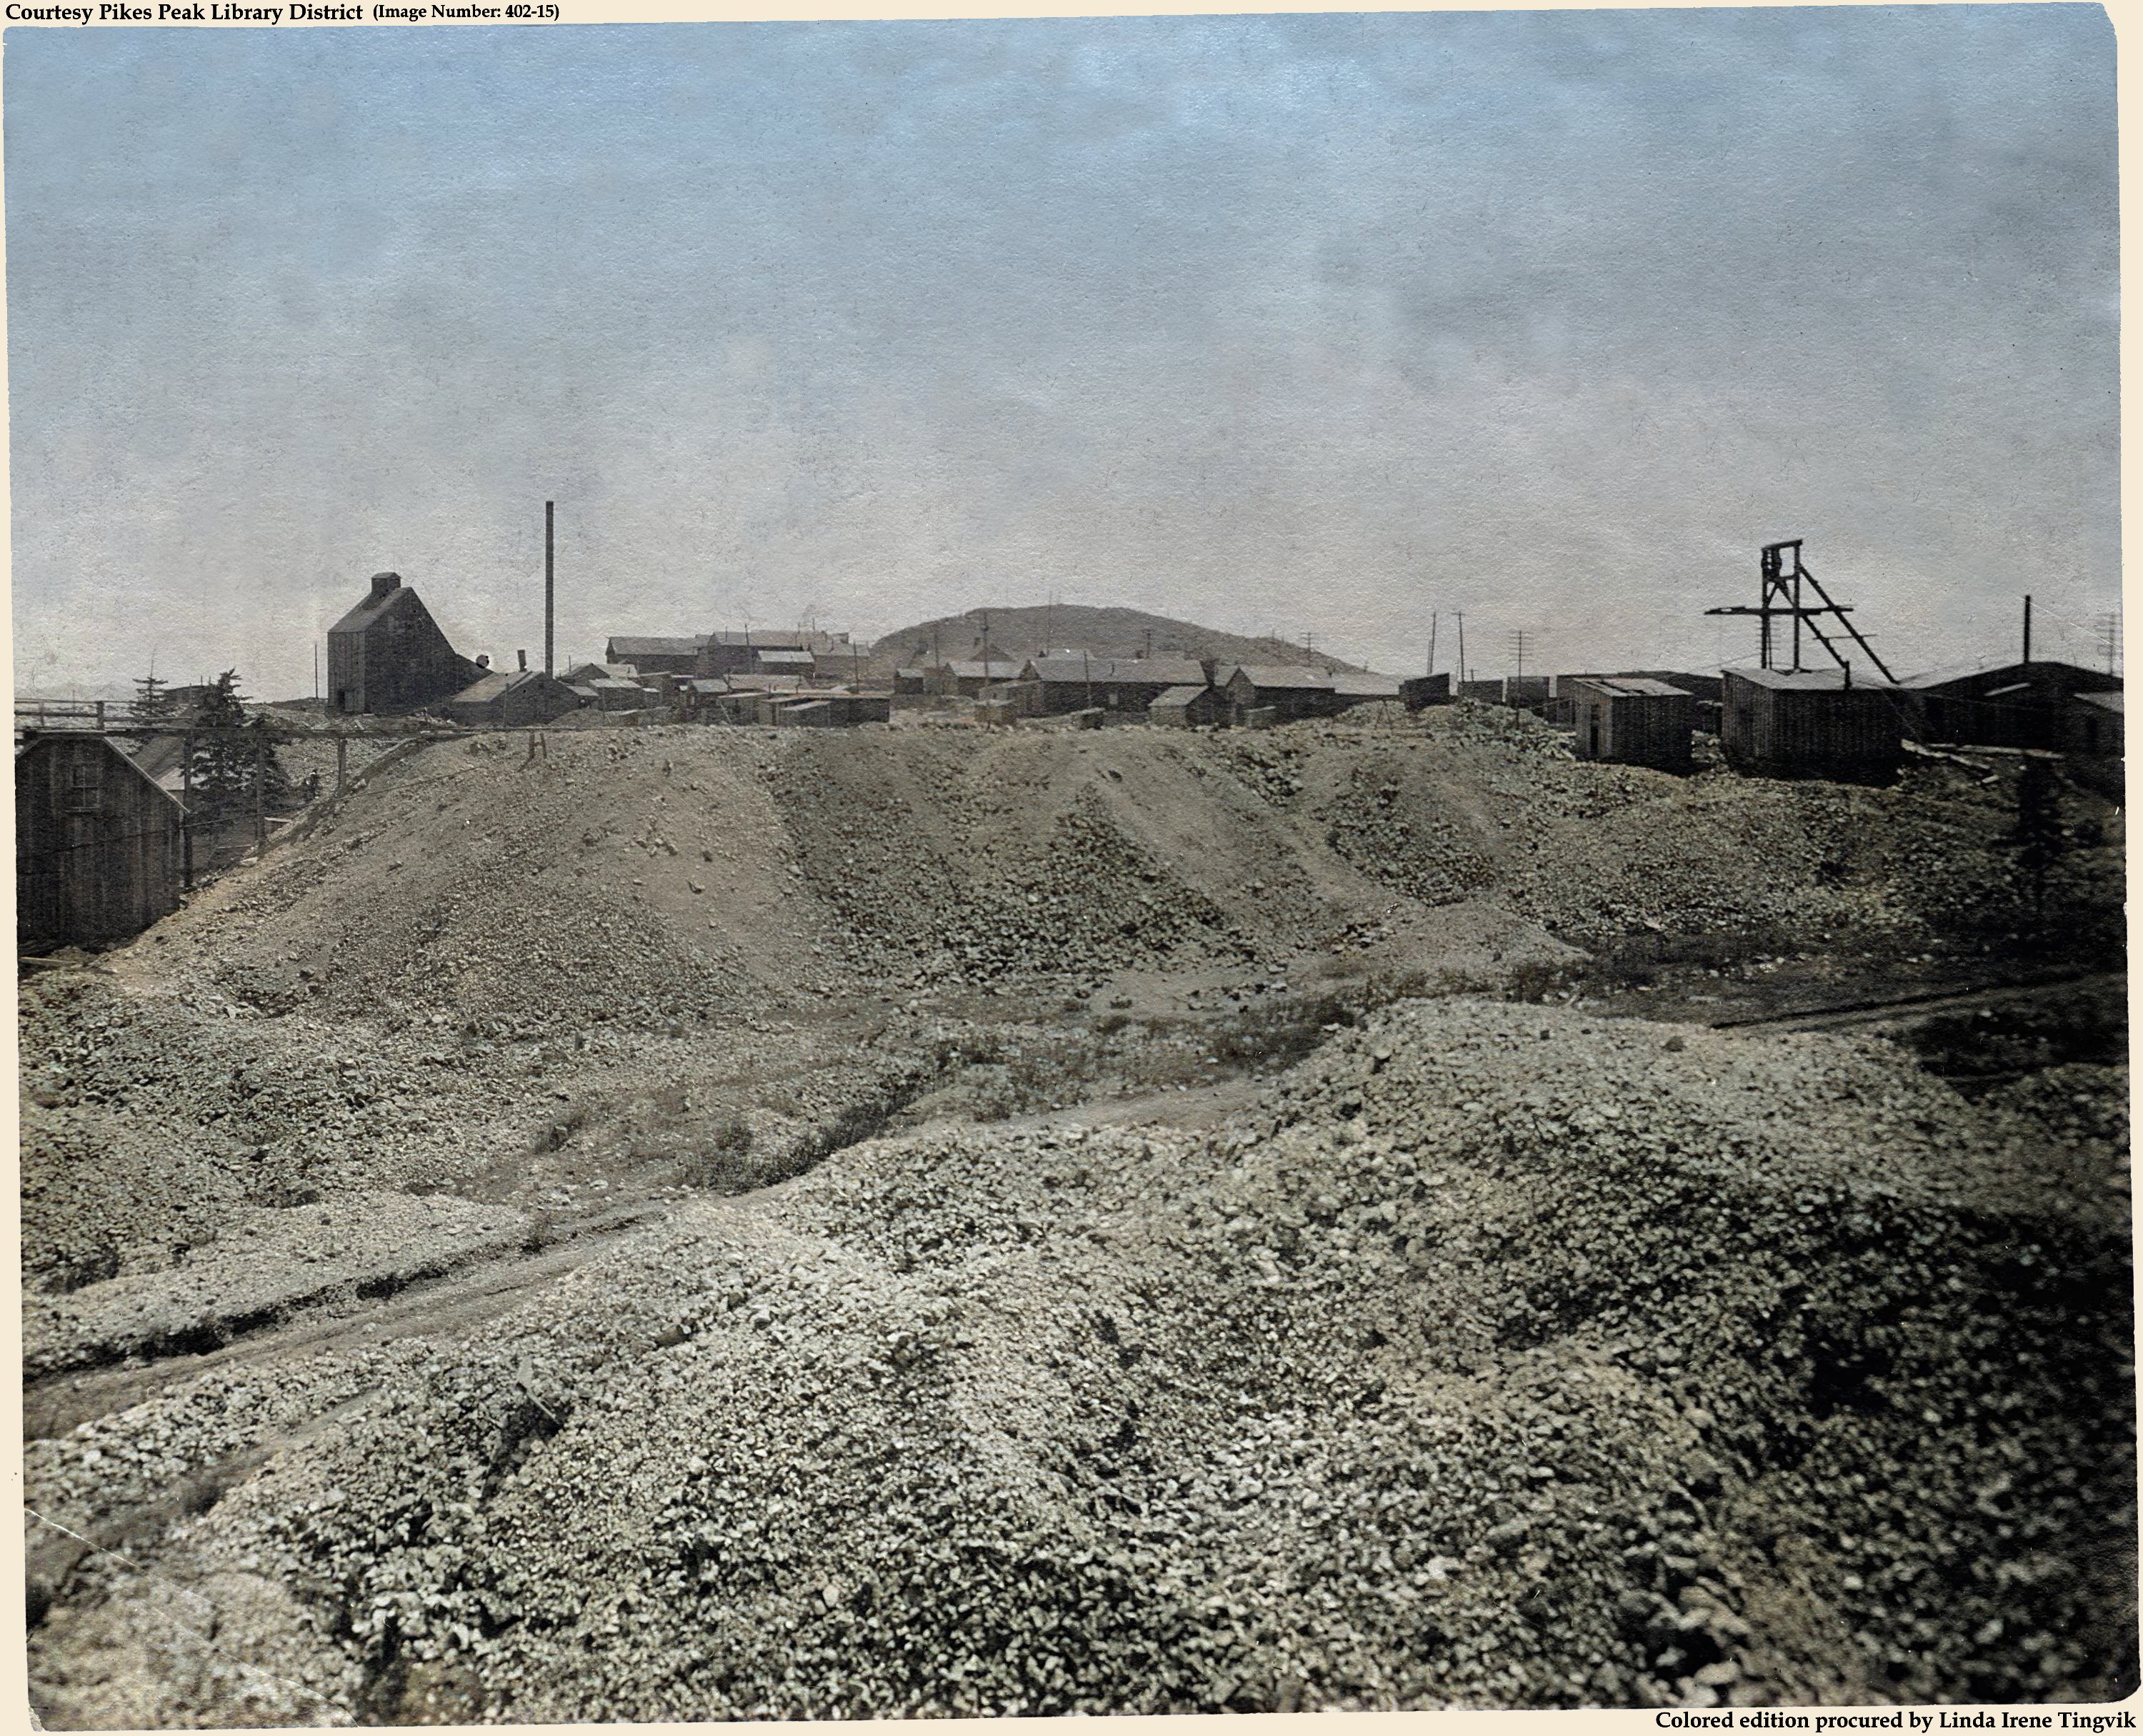 I like this Harlan Photo, even if it has many flaws. I assume this is from before the 1904 Fire that took out the town of Altman, but I really do not know. I do know that this view is taken from northwest of Altman, looking towards Bull Cliff seen as the top sticking up over the houses about center of the view sideways and about 1/3 down from top.
   * At about center top/down at left-hand side is the Orehouse of the Acacia Co. Burns Mine, with a Headframe and structures around that shaft on the right-hand side, and town of Altman houses into the center so to speak.
   * The Pinto Mine Shaft House is seen about 1/3 down from top and about 1/5 in from left-hand side, this is the shaft-house version/look I've seen most often in images/views.
   * The photographer stands on the dumping ground of the northern Pharmacist shaft house, from all I can gather of sources when I write this text November 29, 2021. Source had flaws, made on not good paper, somewhat faded, spots, discoloration, not sharp, but I worked over it as best as I could.
   I did procure the colored version of this image. Source was gray-toned, or in common speech black & white. Used an online service and tweaked and worked with image to get what looks best to my eyes for the moment.